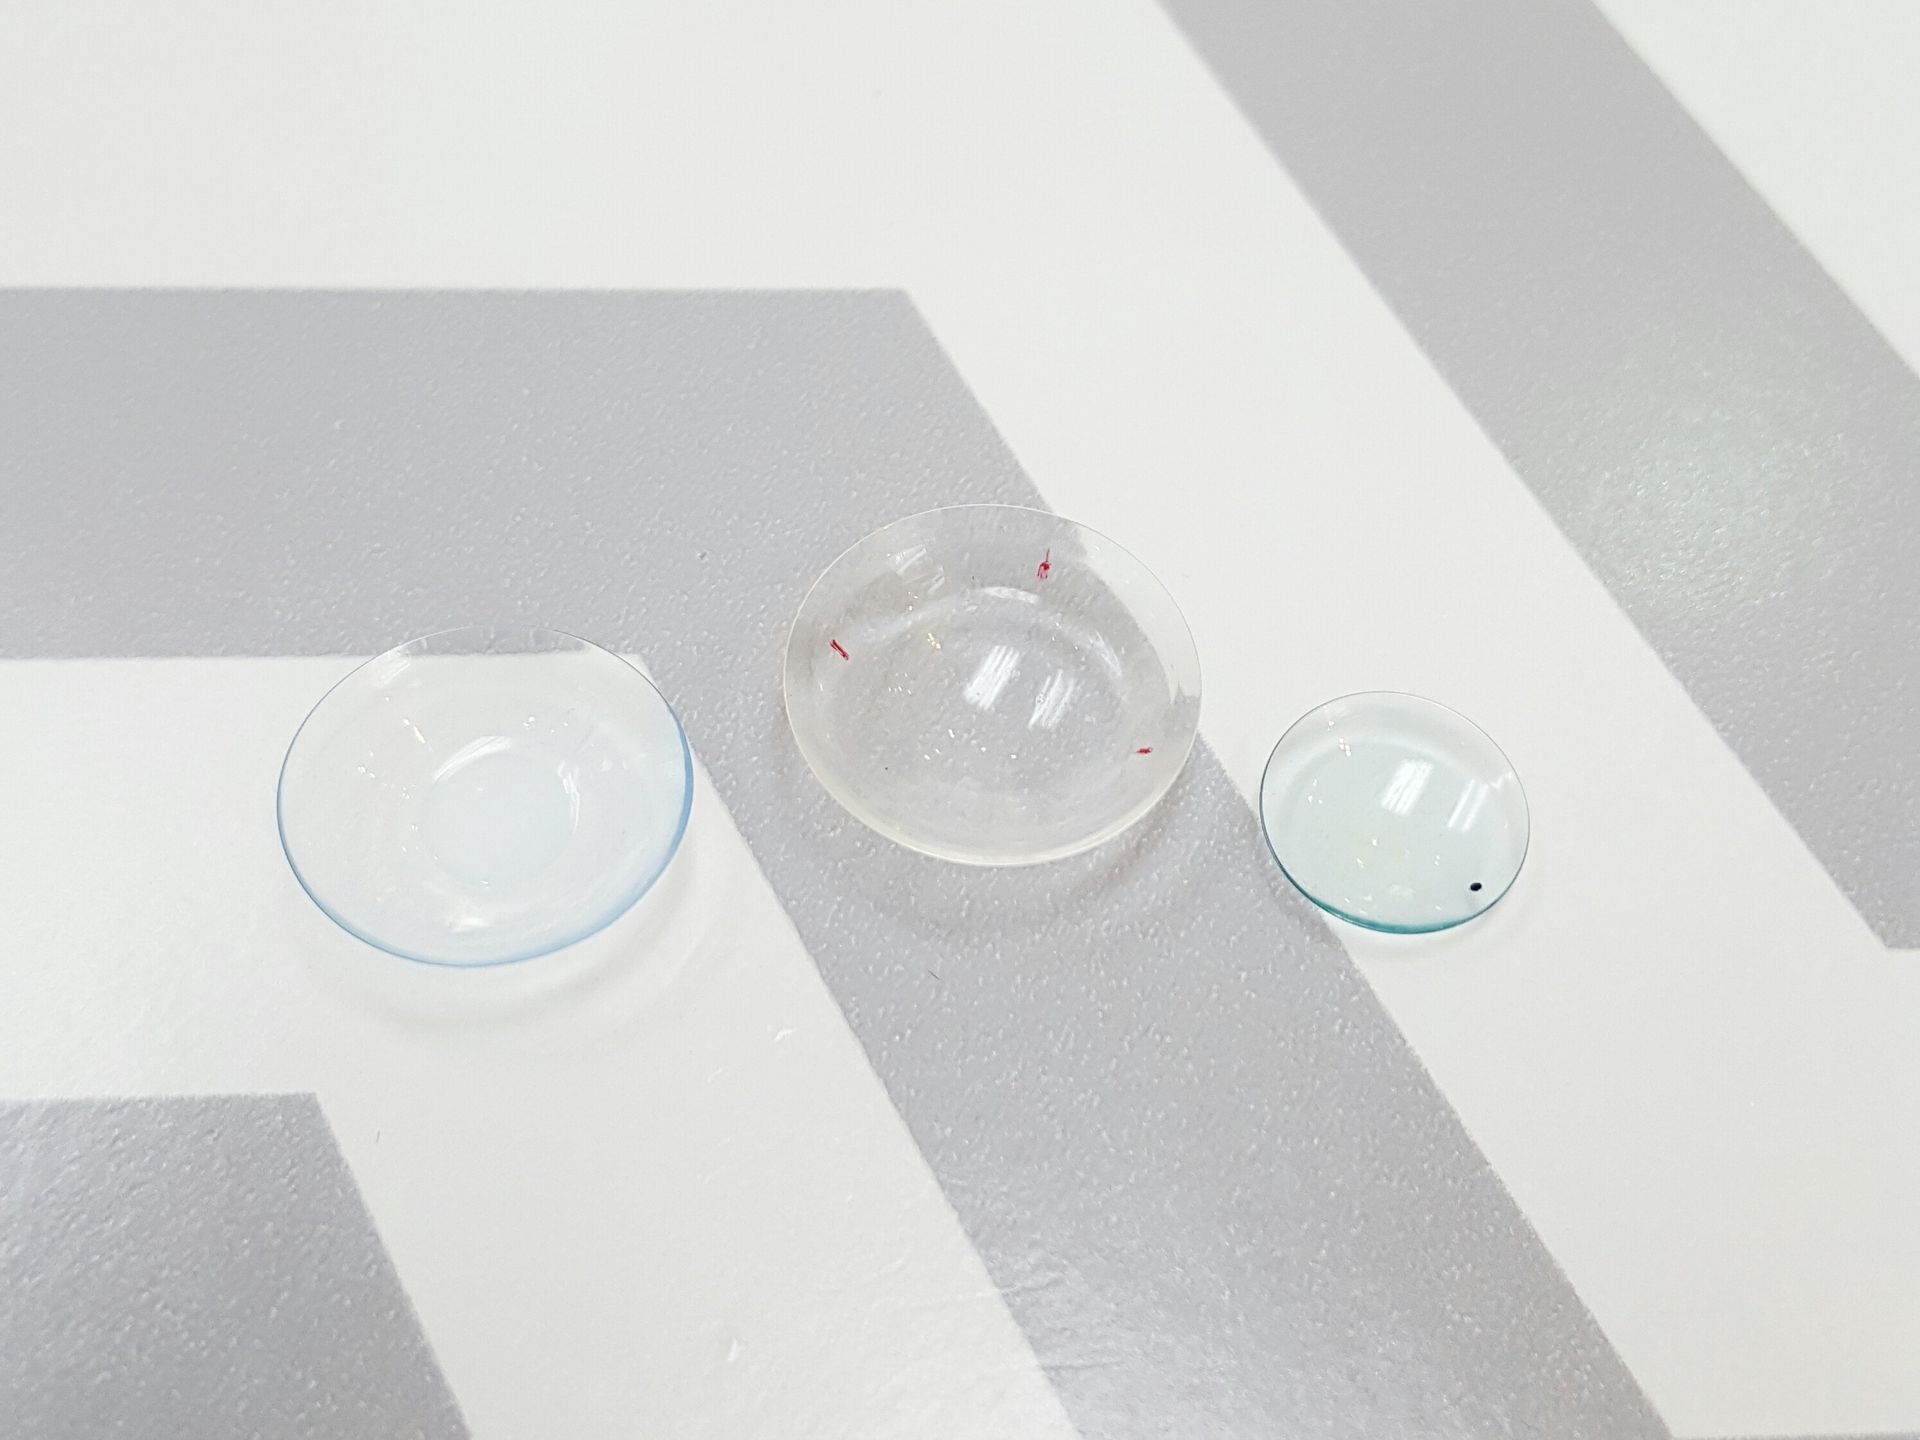 photo showing a size comparison of a soft contact lens, a scleral lens, and a traditional rgp lens